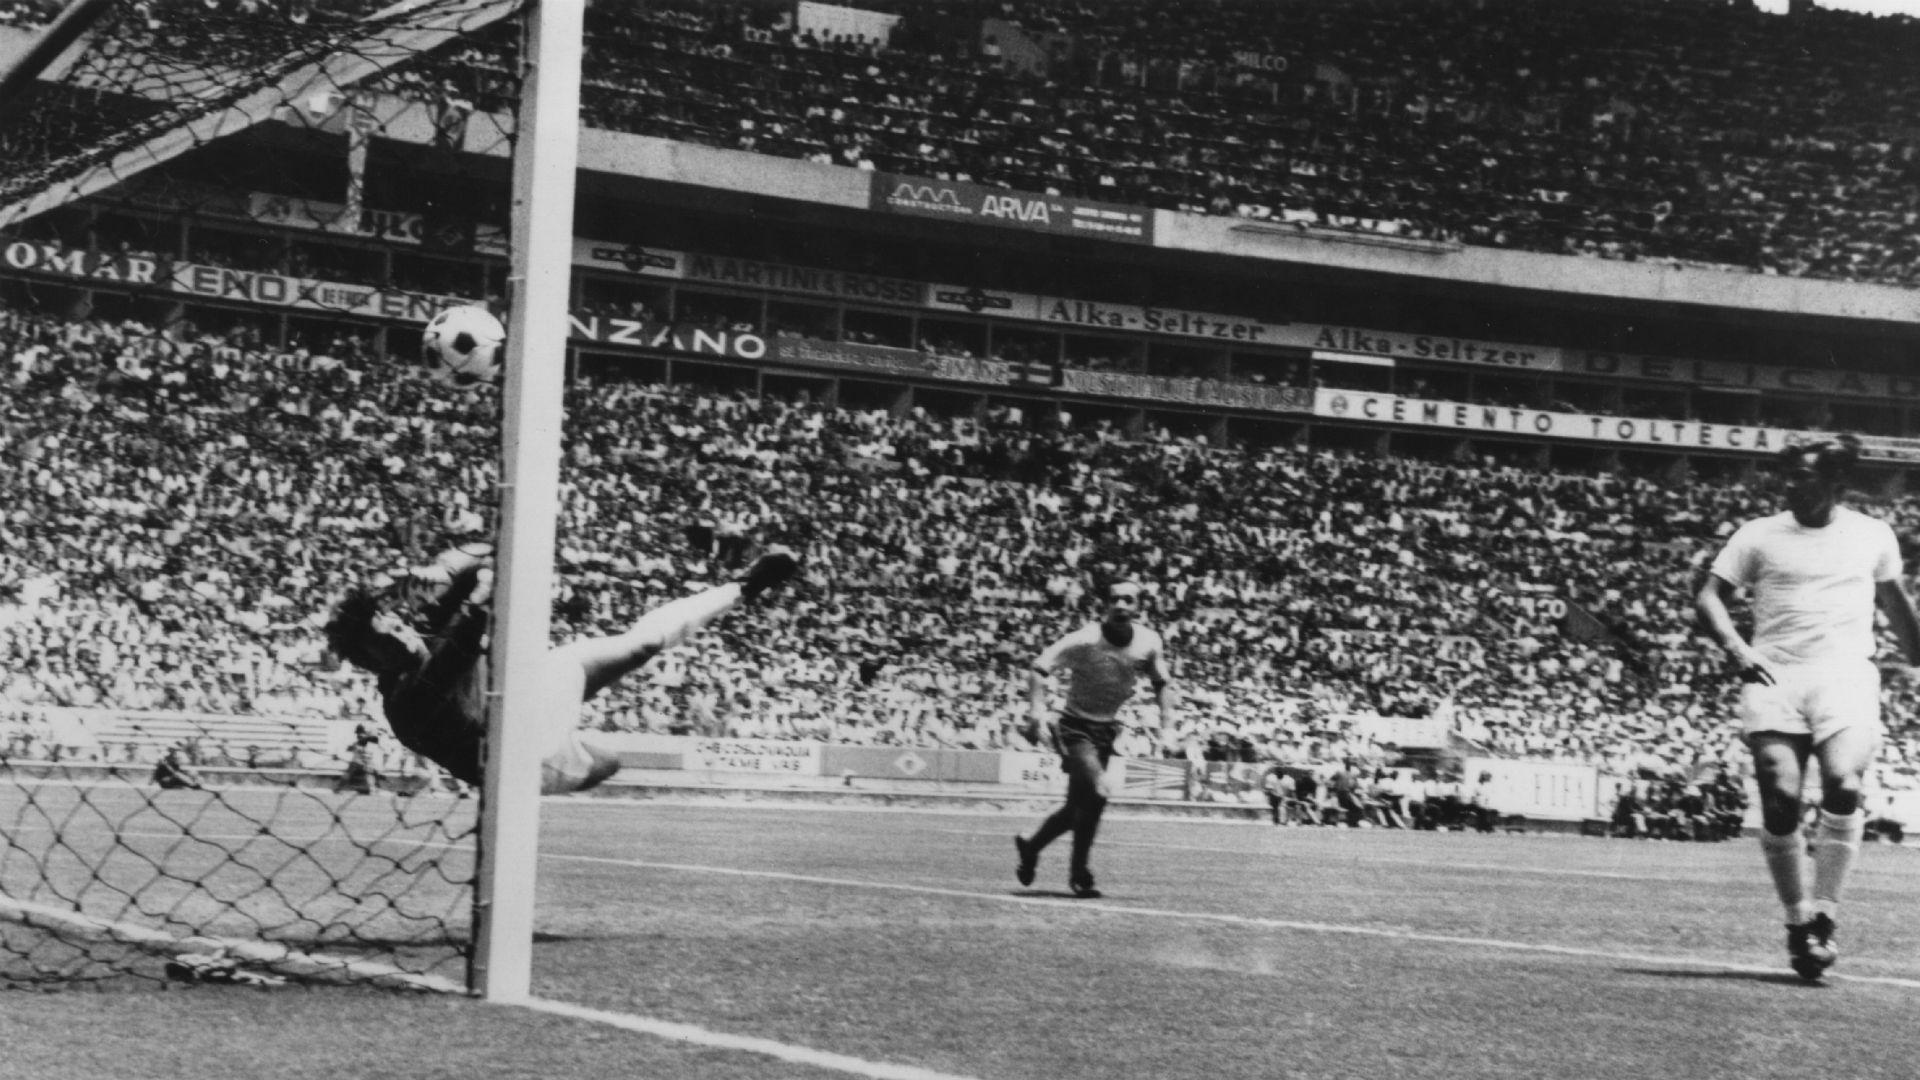 Gordon Banks: A World Cup winner who denied Pele with the Save